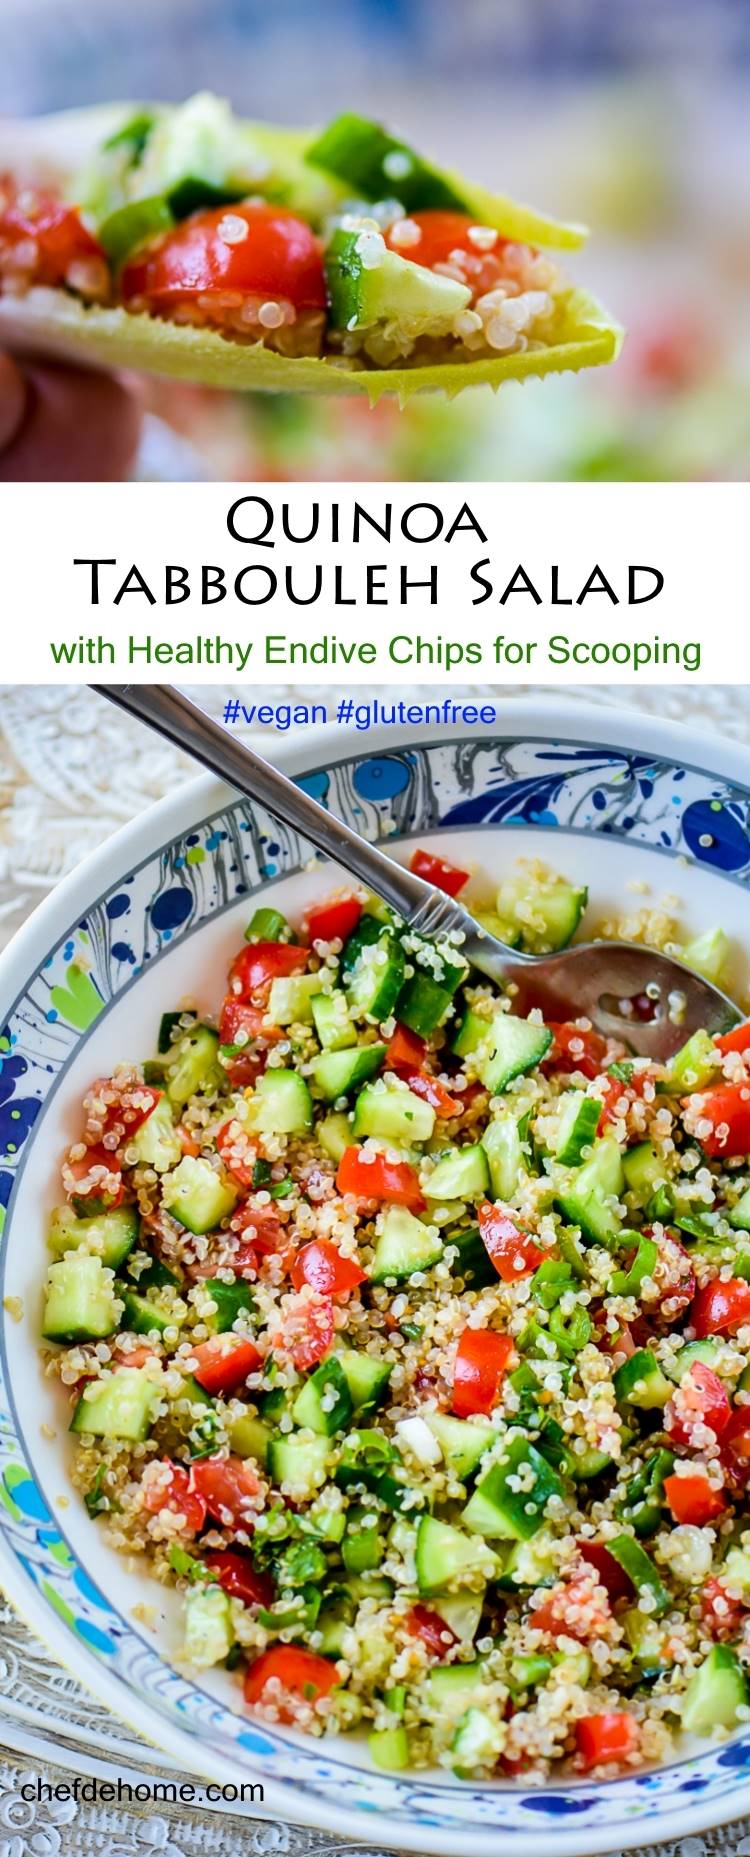 Gluten Free and Vegan Quinoa Tabbouleh Salad with Endive Chips | chefdehome.com